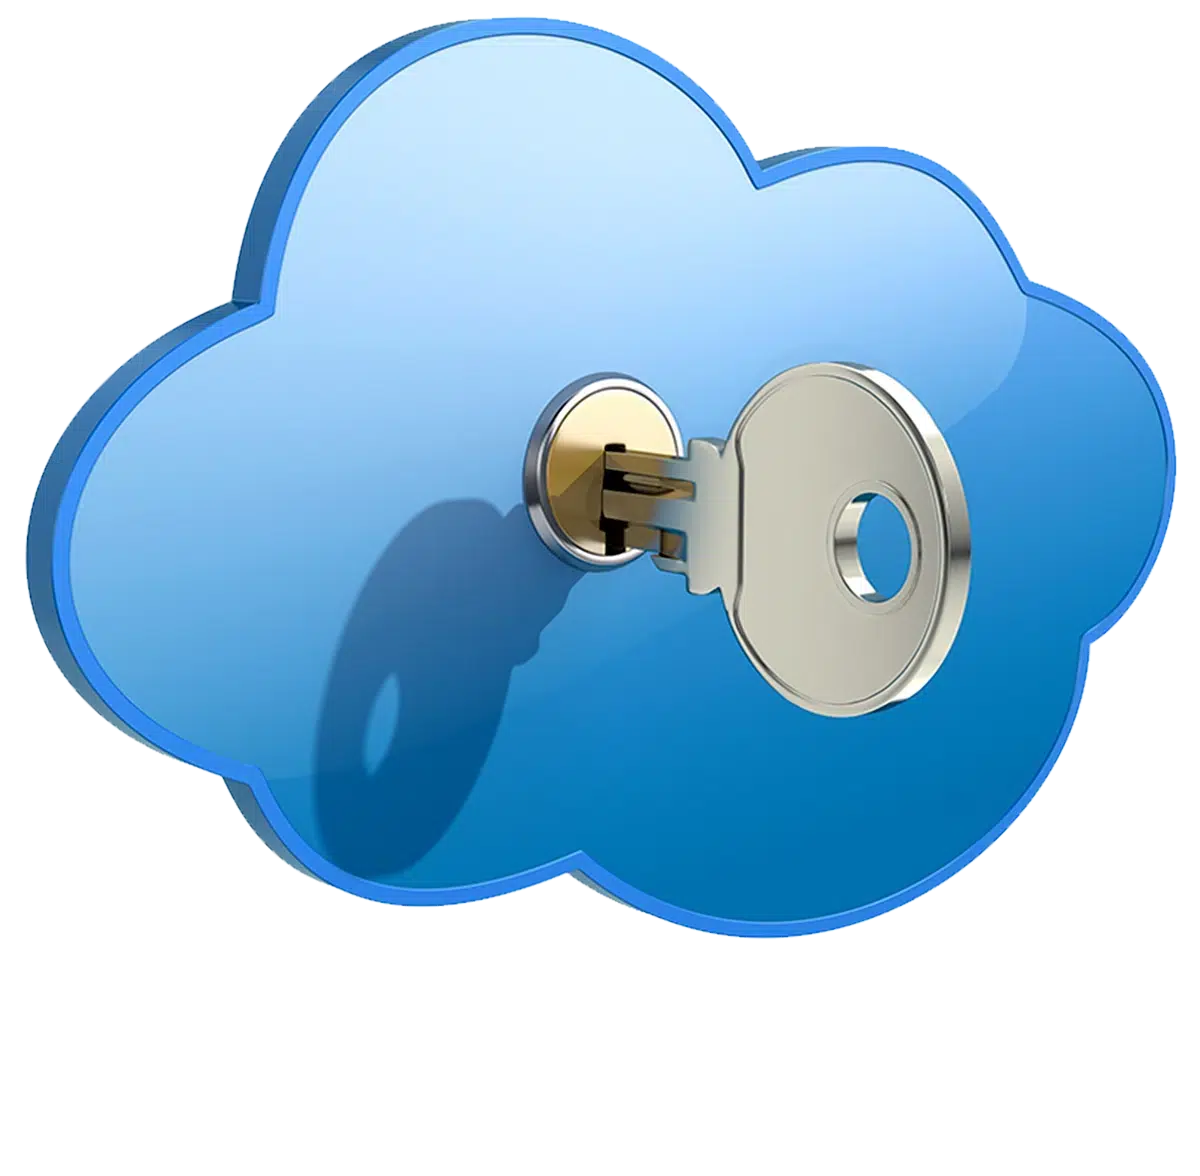 Secure and reliable WordPress hosting services in the cloud.